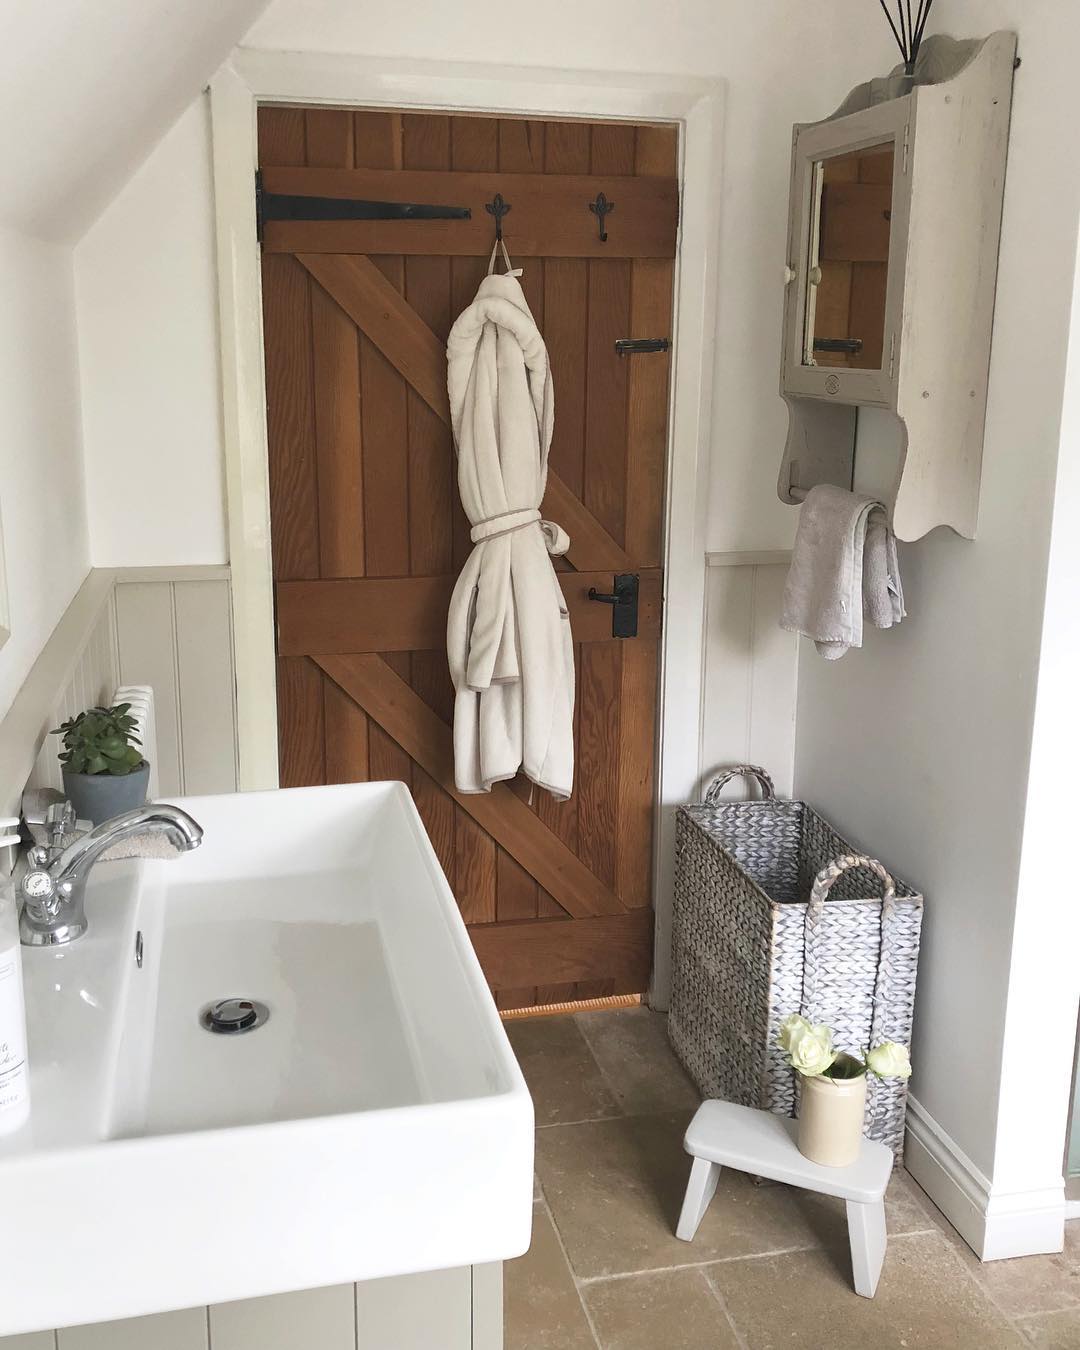 Farmhouse-style bathroom with wooden barn door. Photo by Instagram user from_coast_to_country_home